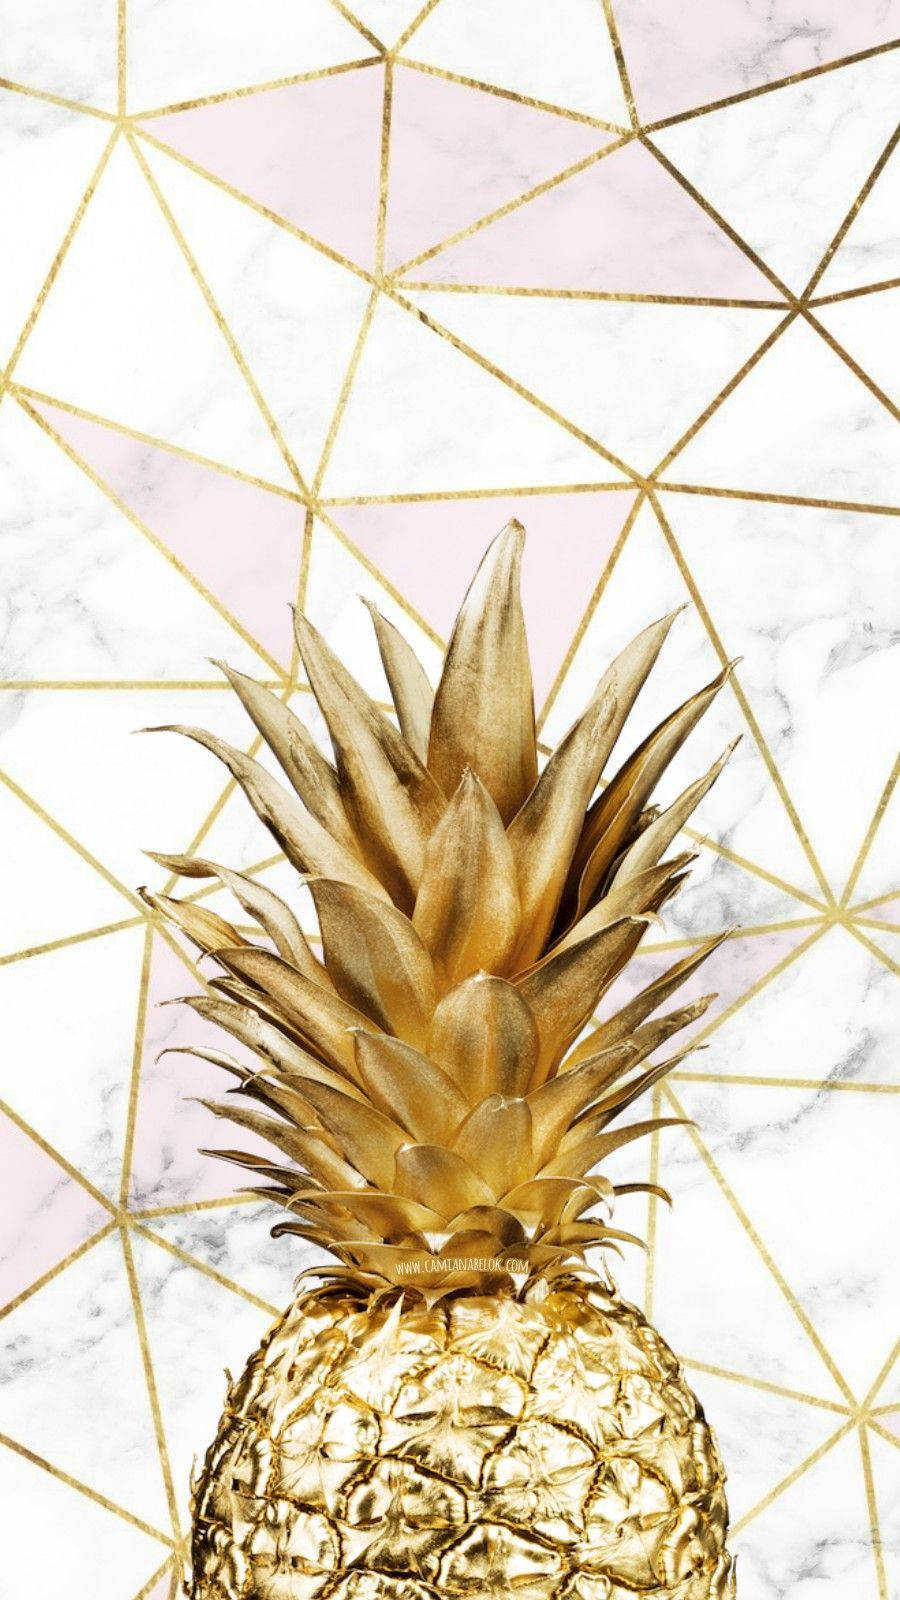 Brighten up your day with this pineapple-themed iPhone wallpaper! Wallpaper